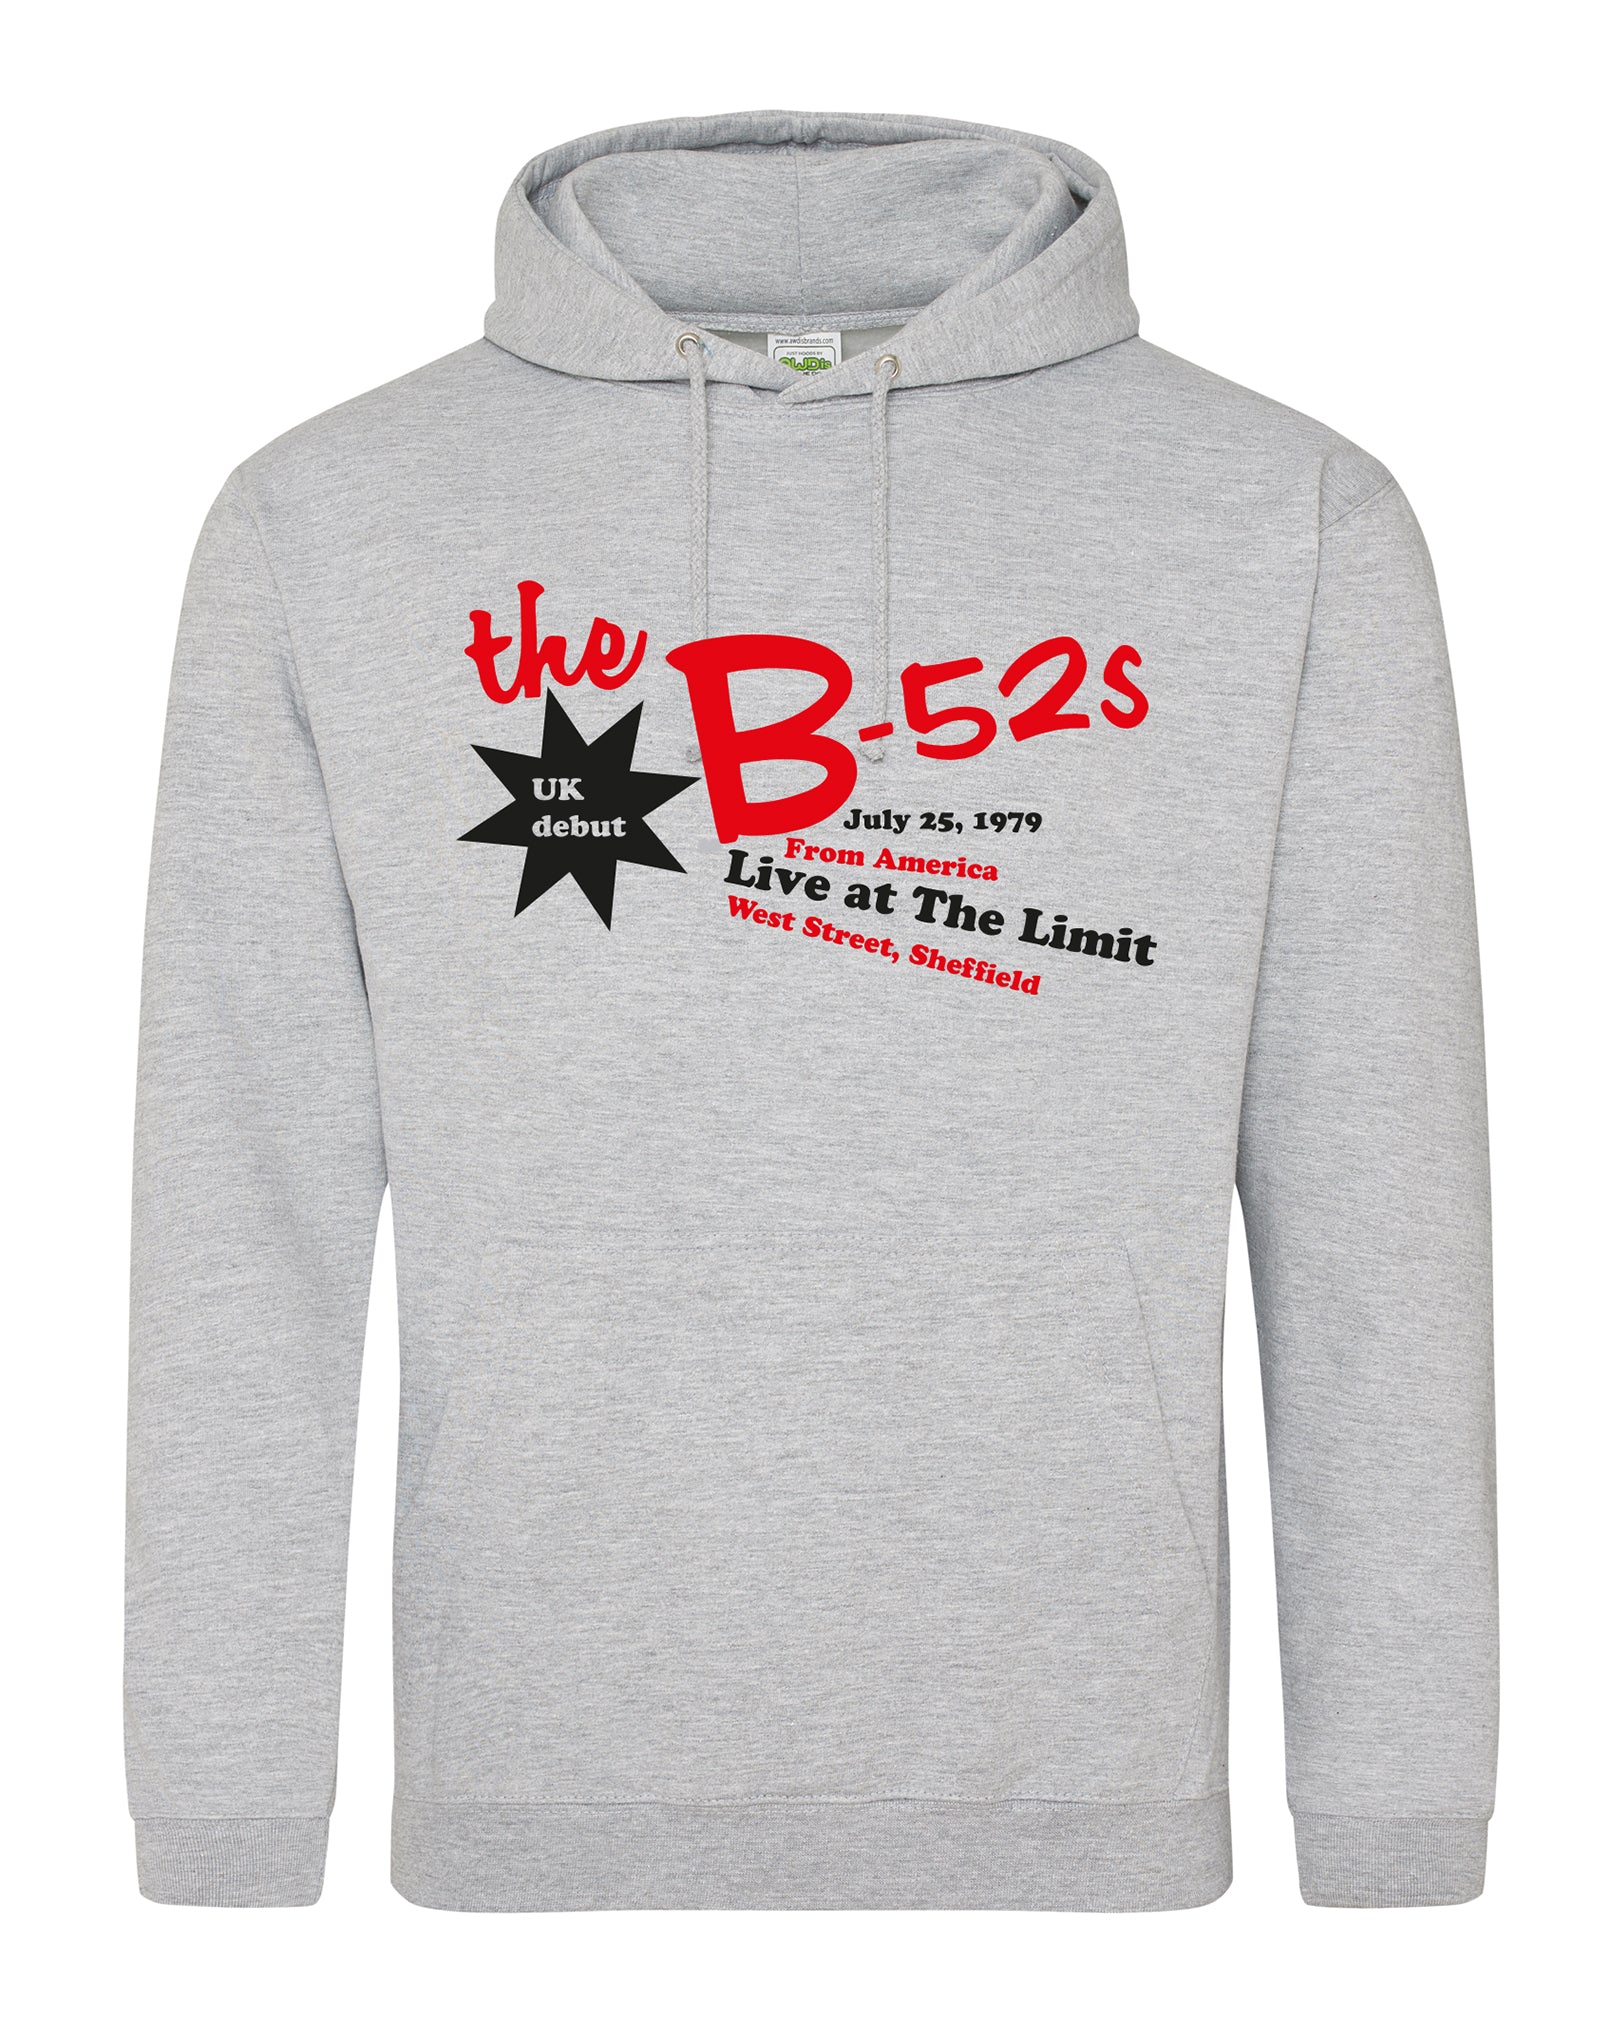 B-52's at the Limit unisex fit sweatshirt - various colours - Dirty Stop Outs